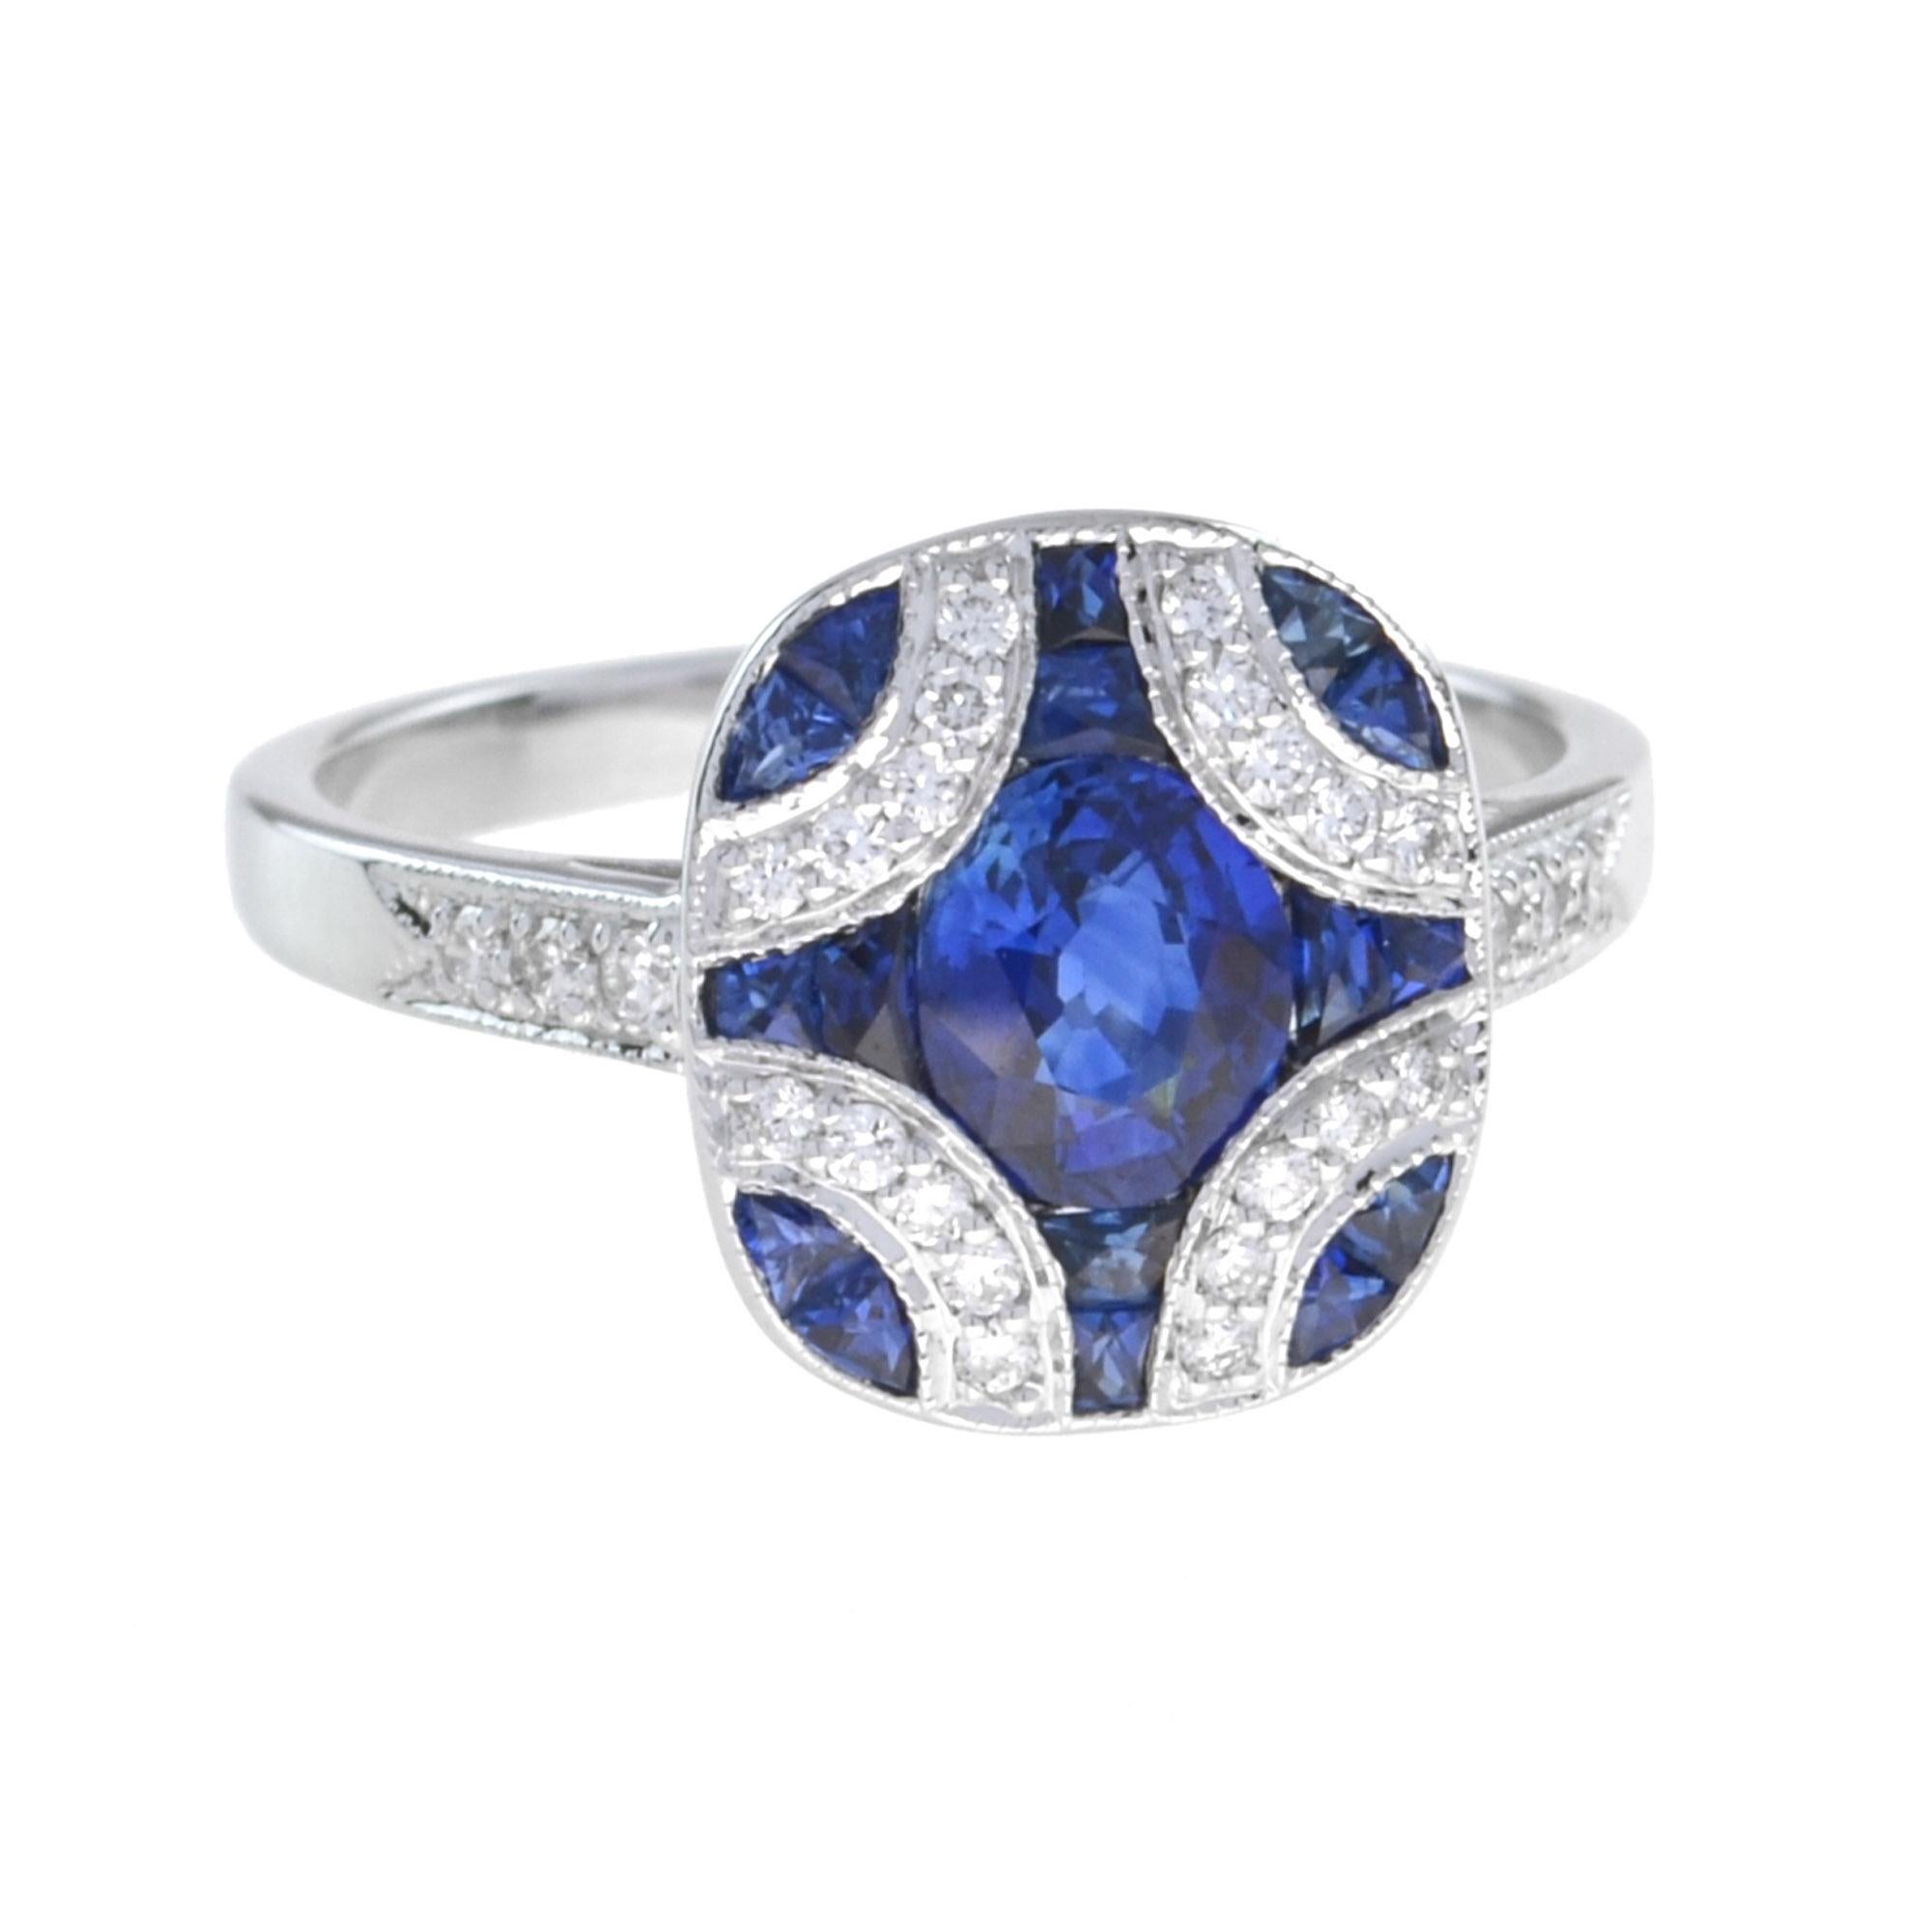 For Sale:  Art Deco Style Oval Sapphire with Diamond Ring in 18K White Gold 3